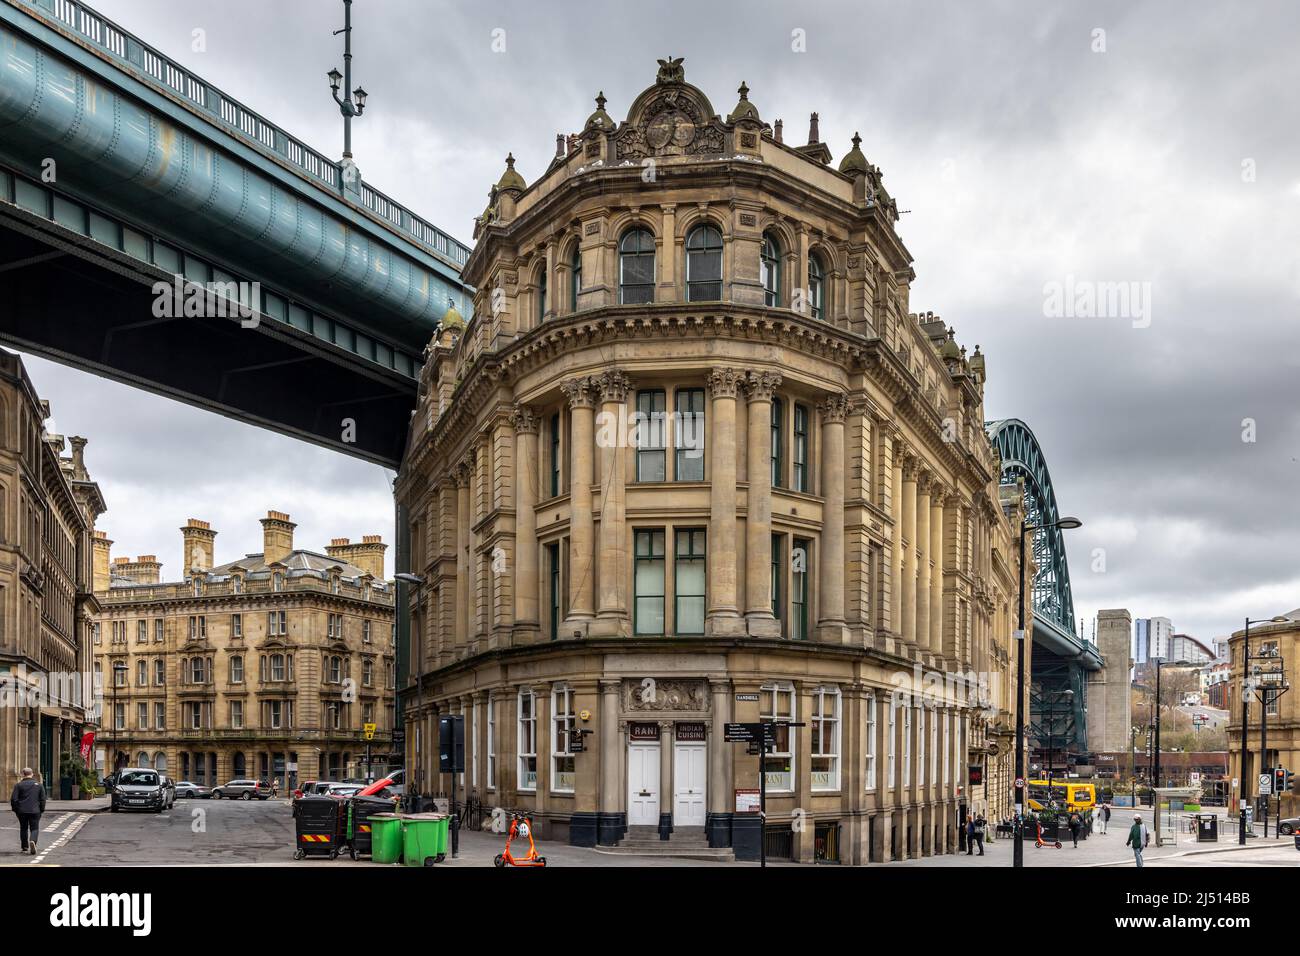 The Tyne Bridge and the neoclassical style Phoenix Apartments building in the old town Sandhill area of Newcastle upon Tyne. Stock Photo